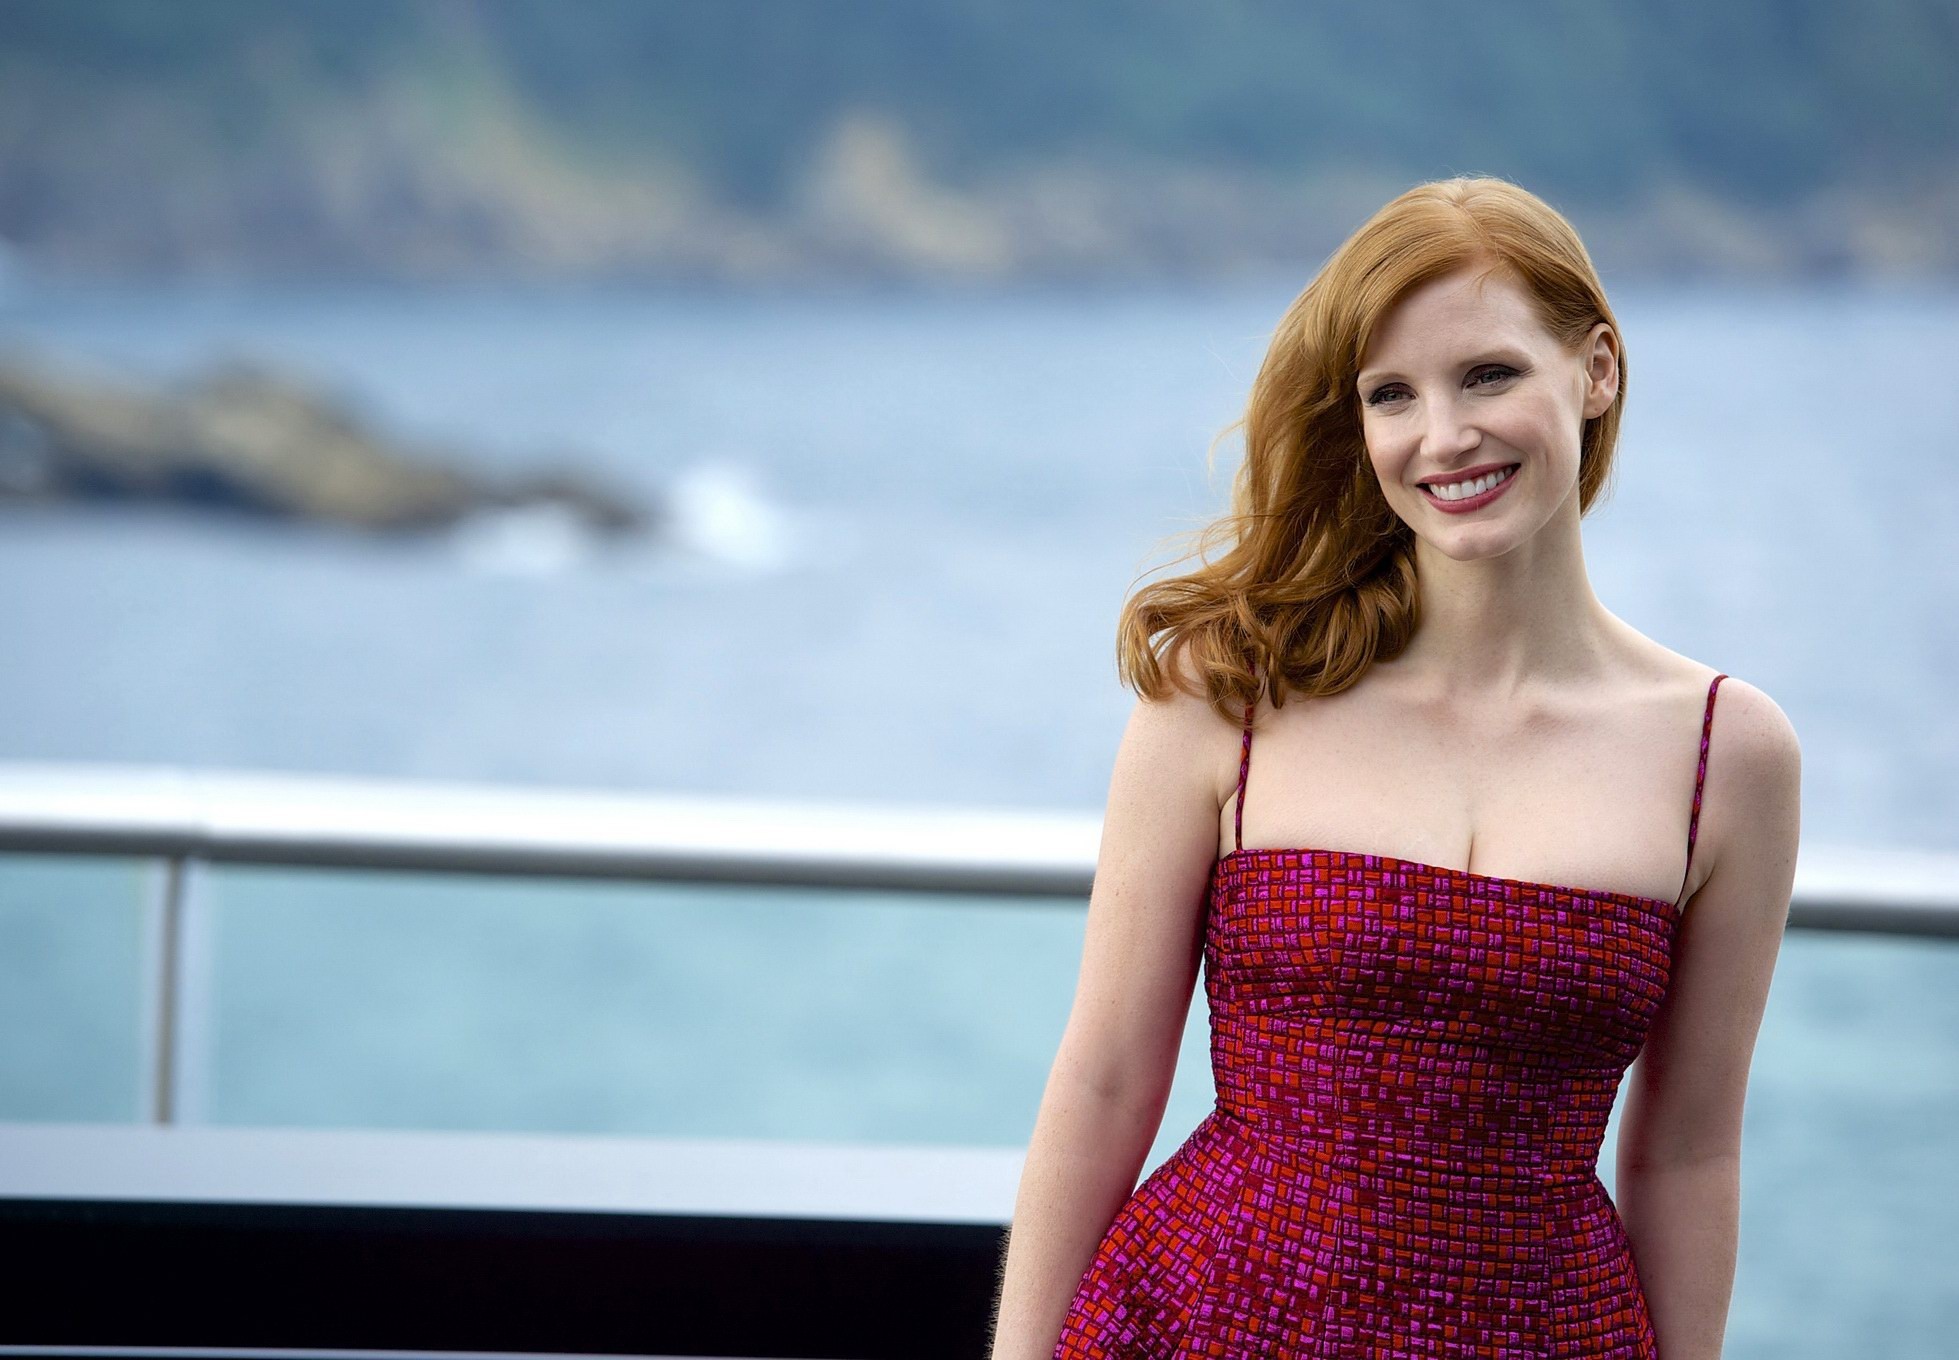 Jessica Chastain showing cleavage at The Dissapearance of Eleanor Rigby photocal #75184937